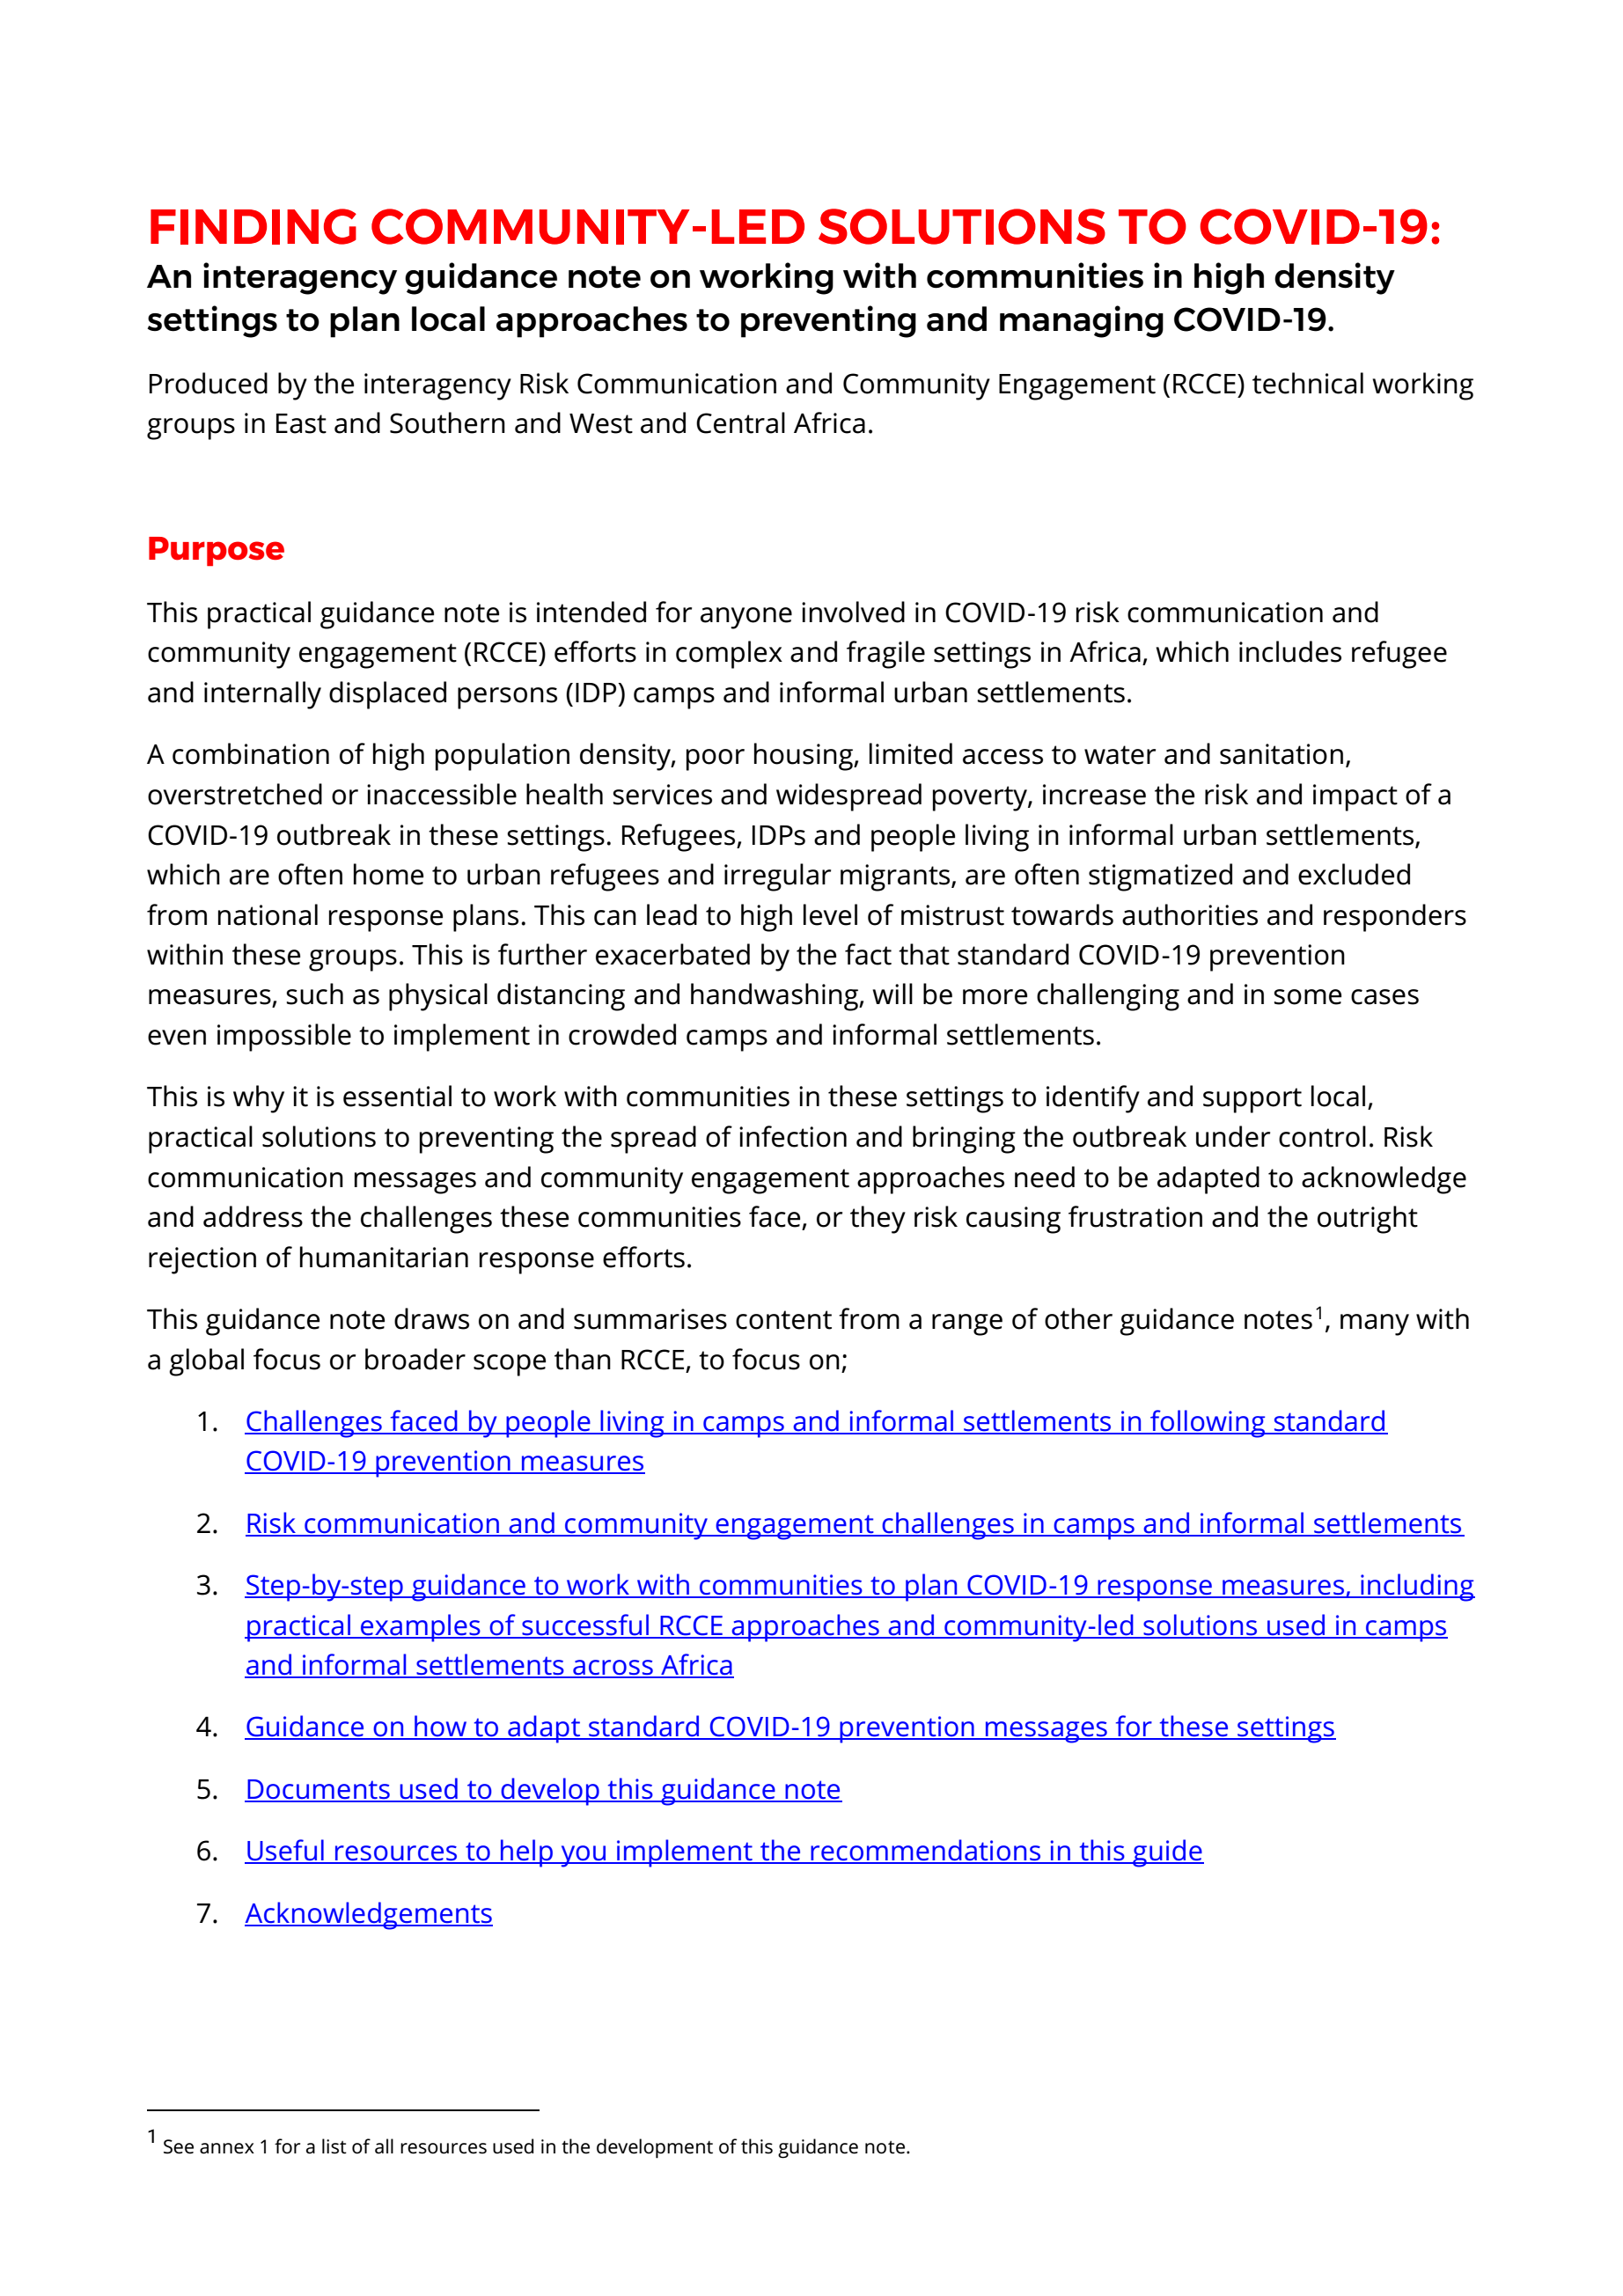 Community_Led_Solutions_COVID-19_Africa_Interagency_Guidance Note_FINAL